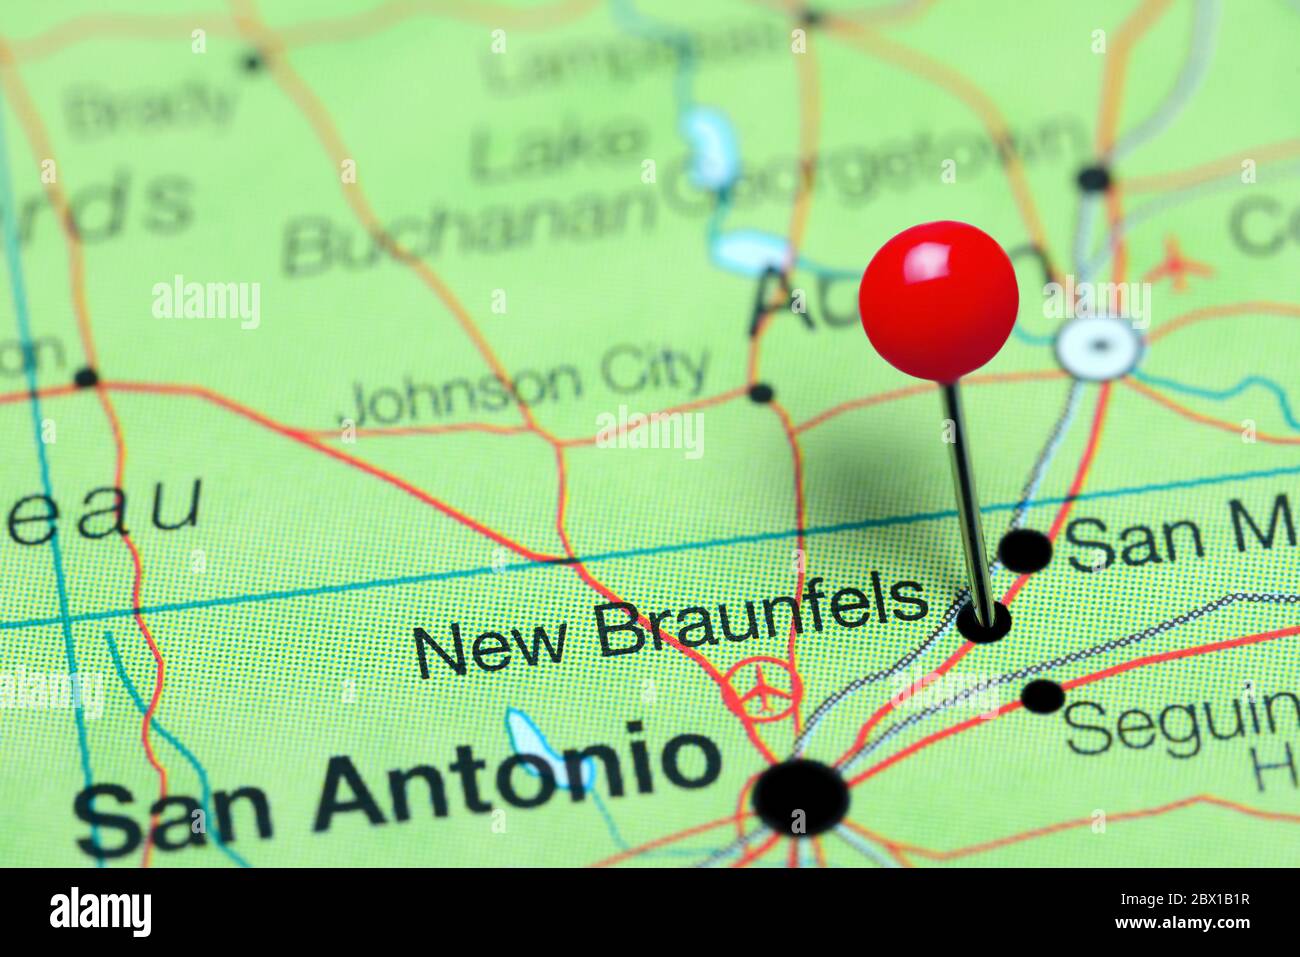 New Braunfels pinned on a map of Texas, USA Stock Photo